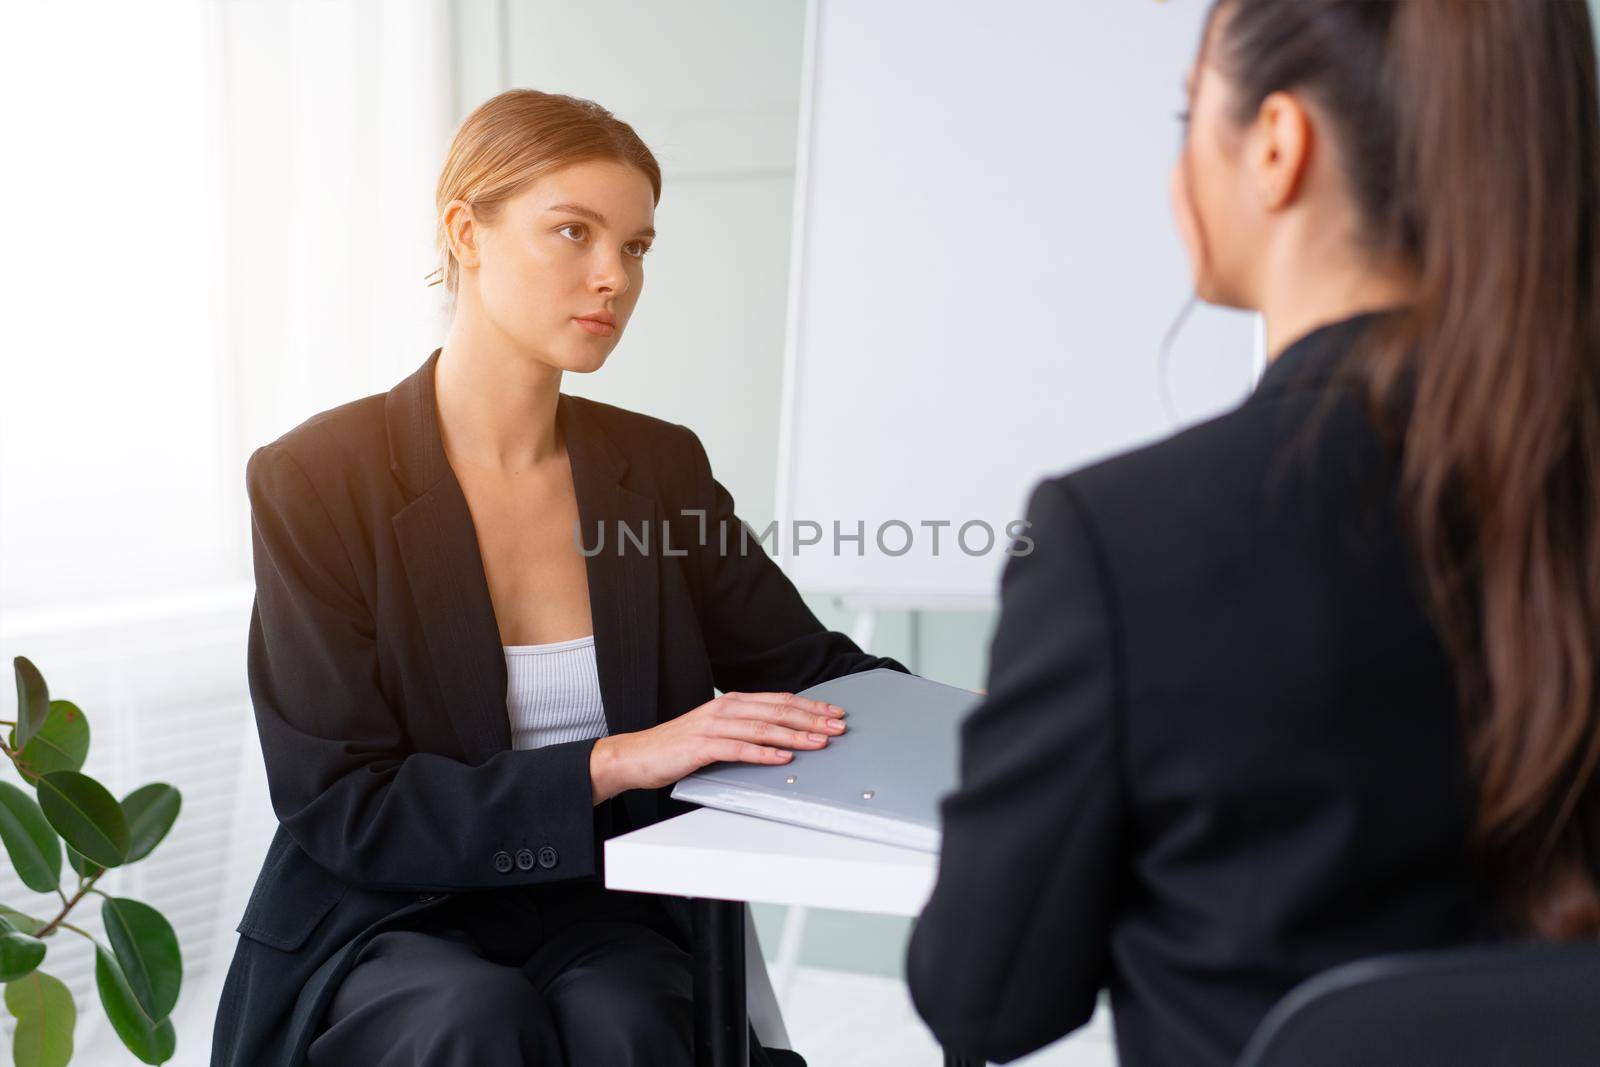 Job interview. Business, career and placement concept. Young blonde woman holding resume, while sitting in front of candidate during corporate meeting. Boss discuss ideas with business partner